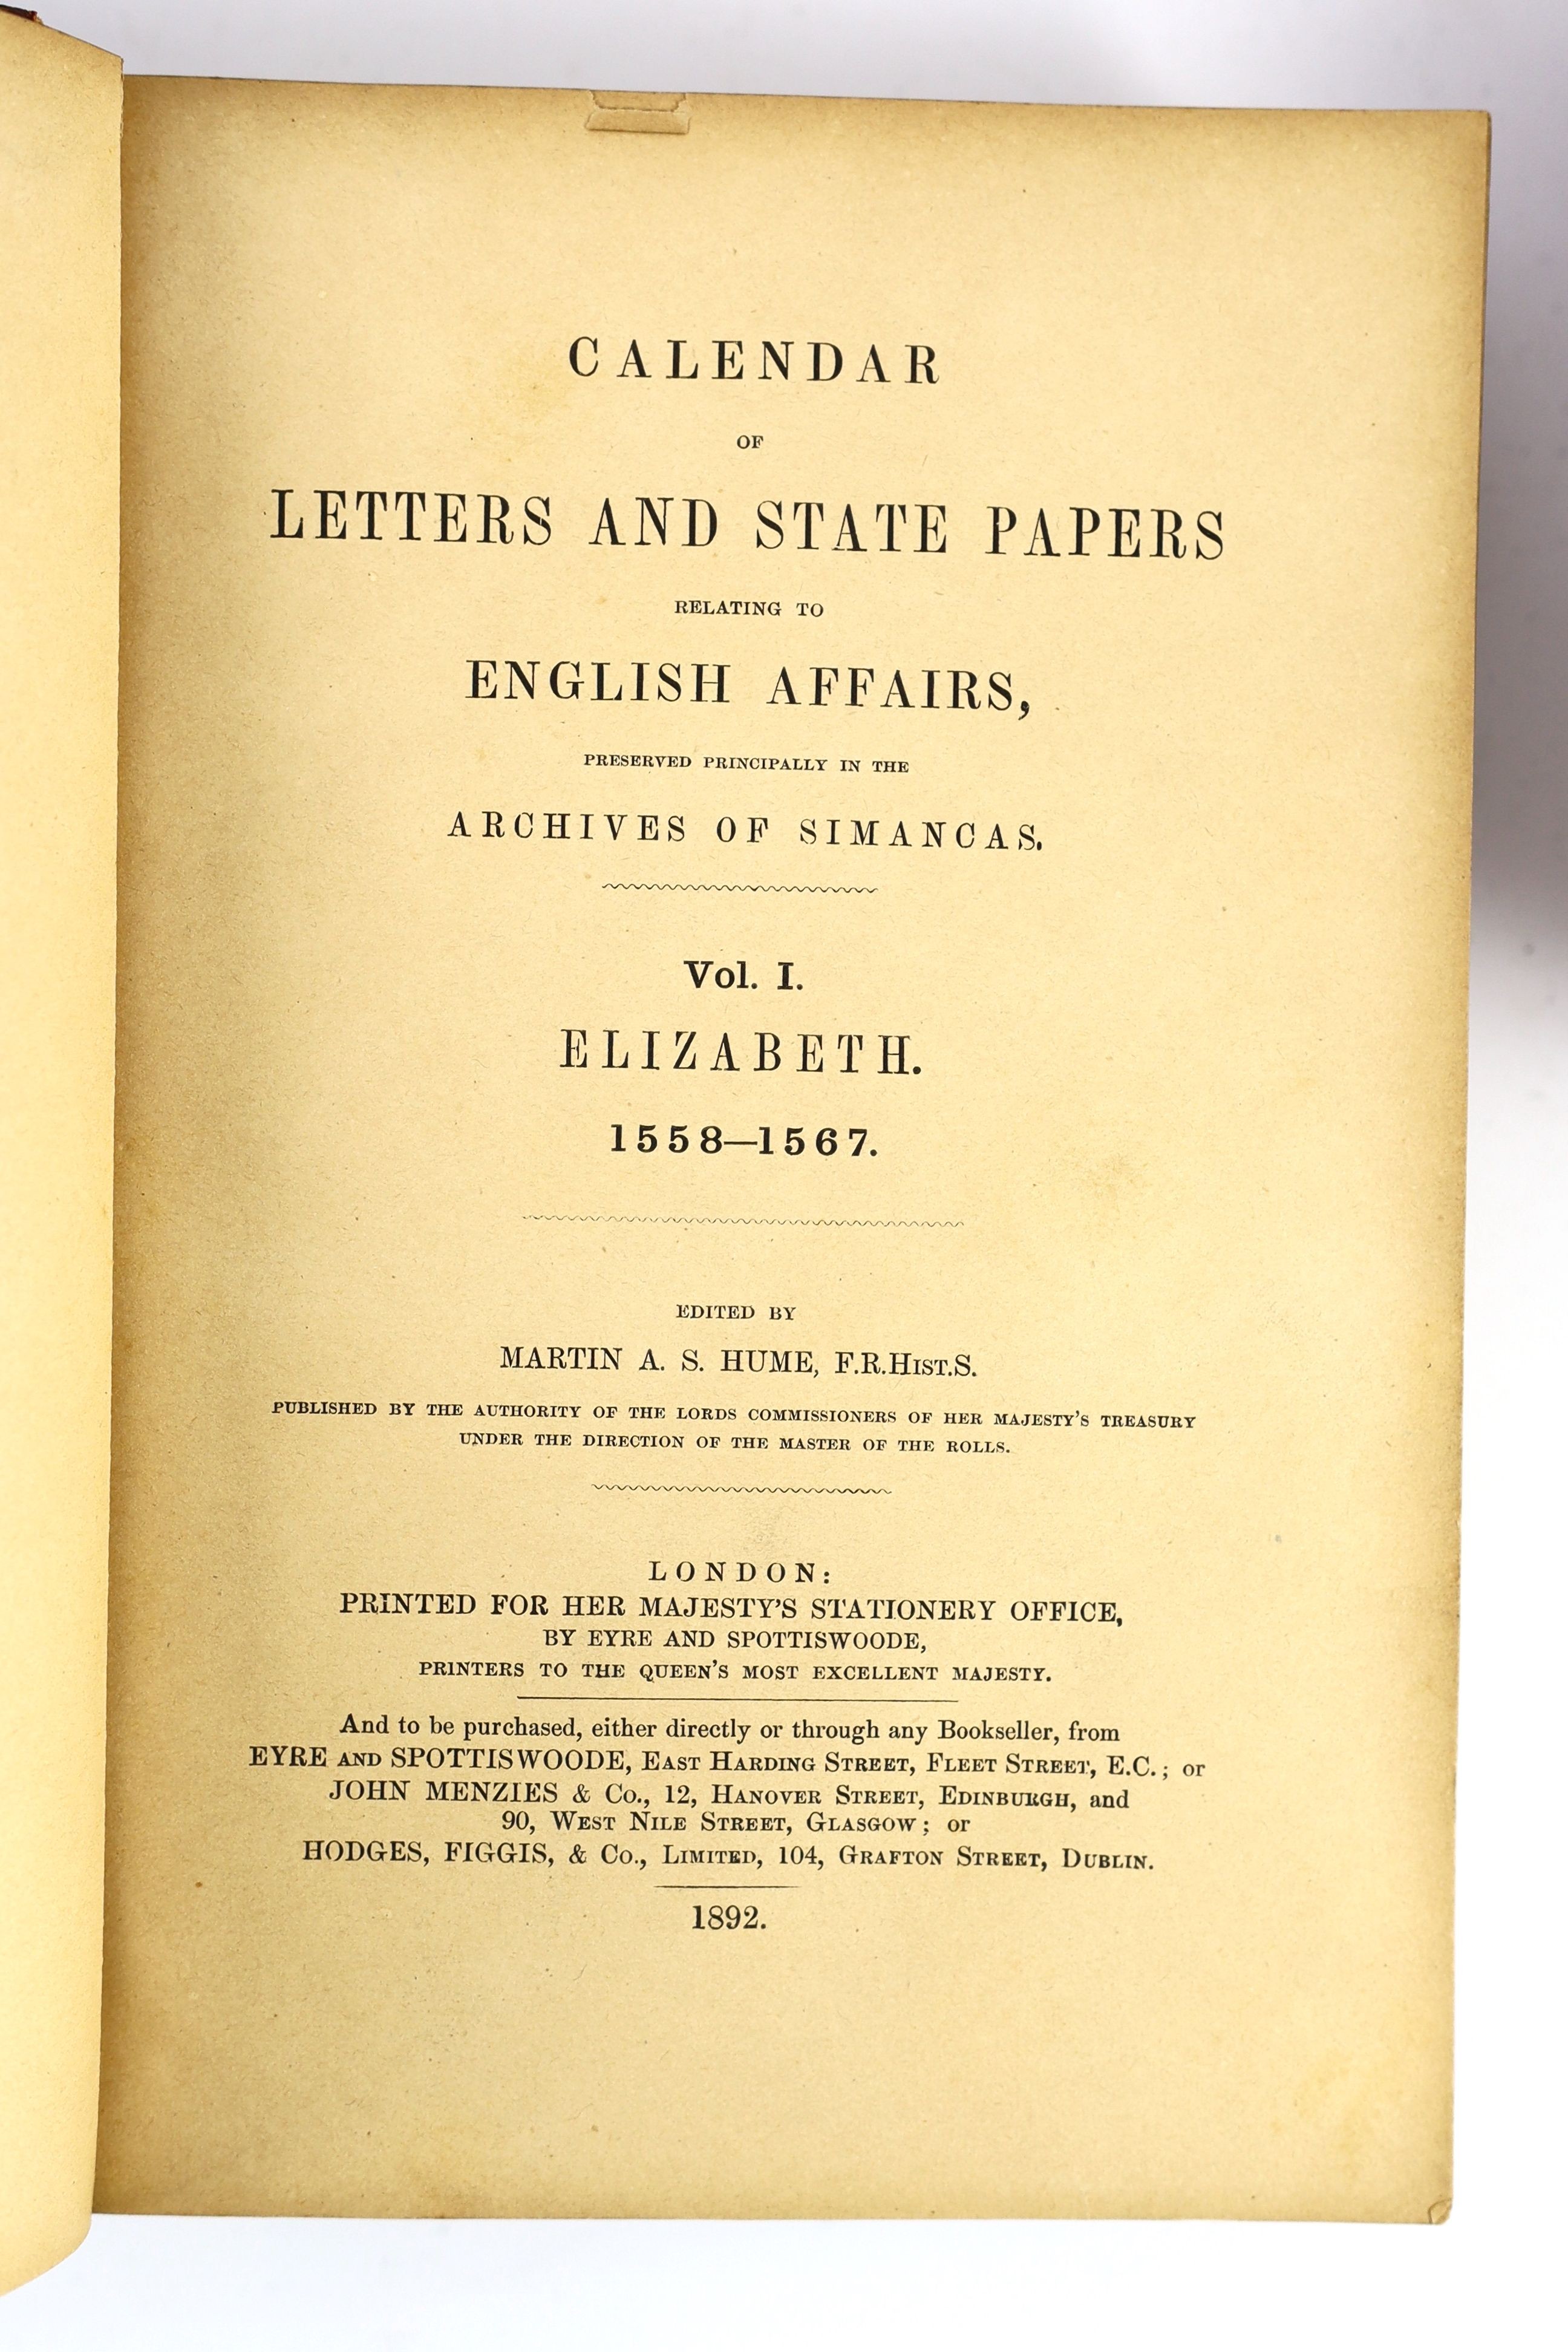 State Papers (Spanish) - Calendar of Letters and State Papers relating to English Affairs, preserved principally in the archives of Simancas ....edited by Martin A. S. Hume. vols 1-3 (of 4). early 20th cent. red half mor